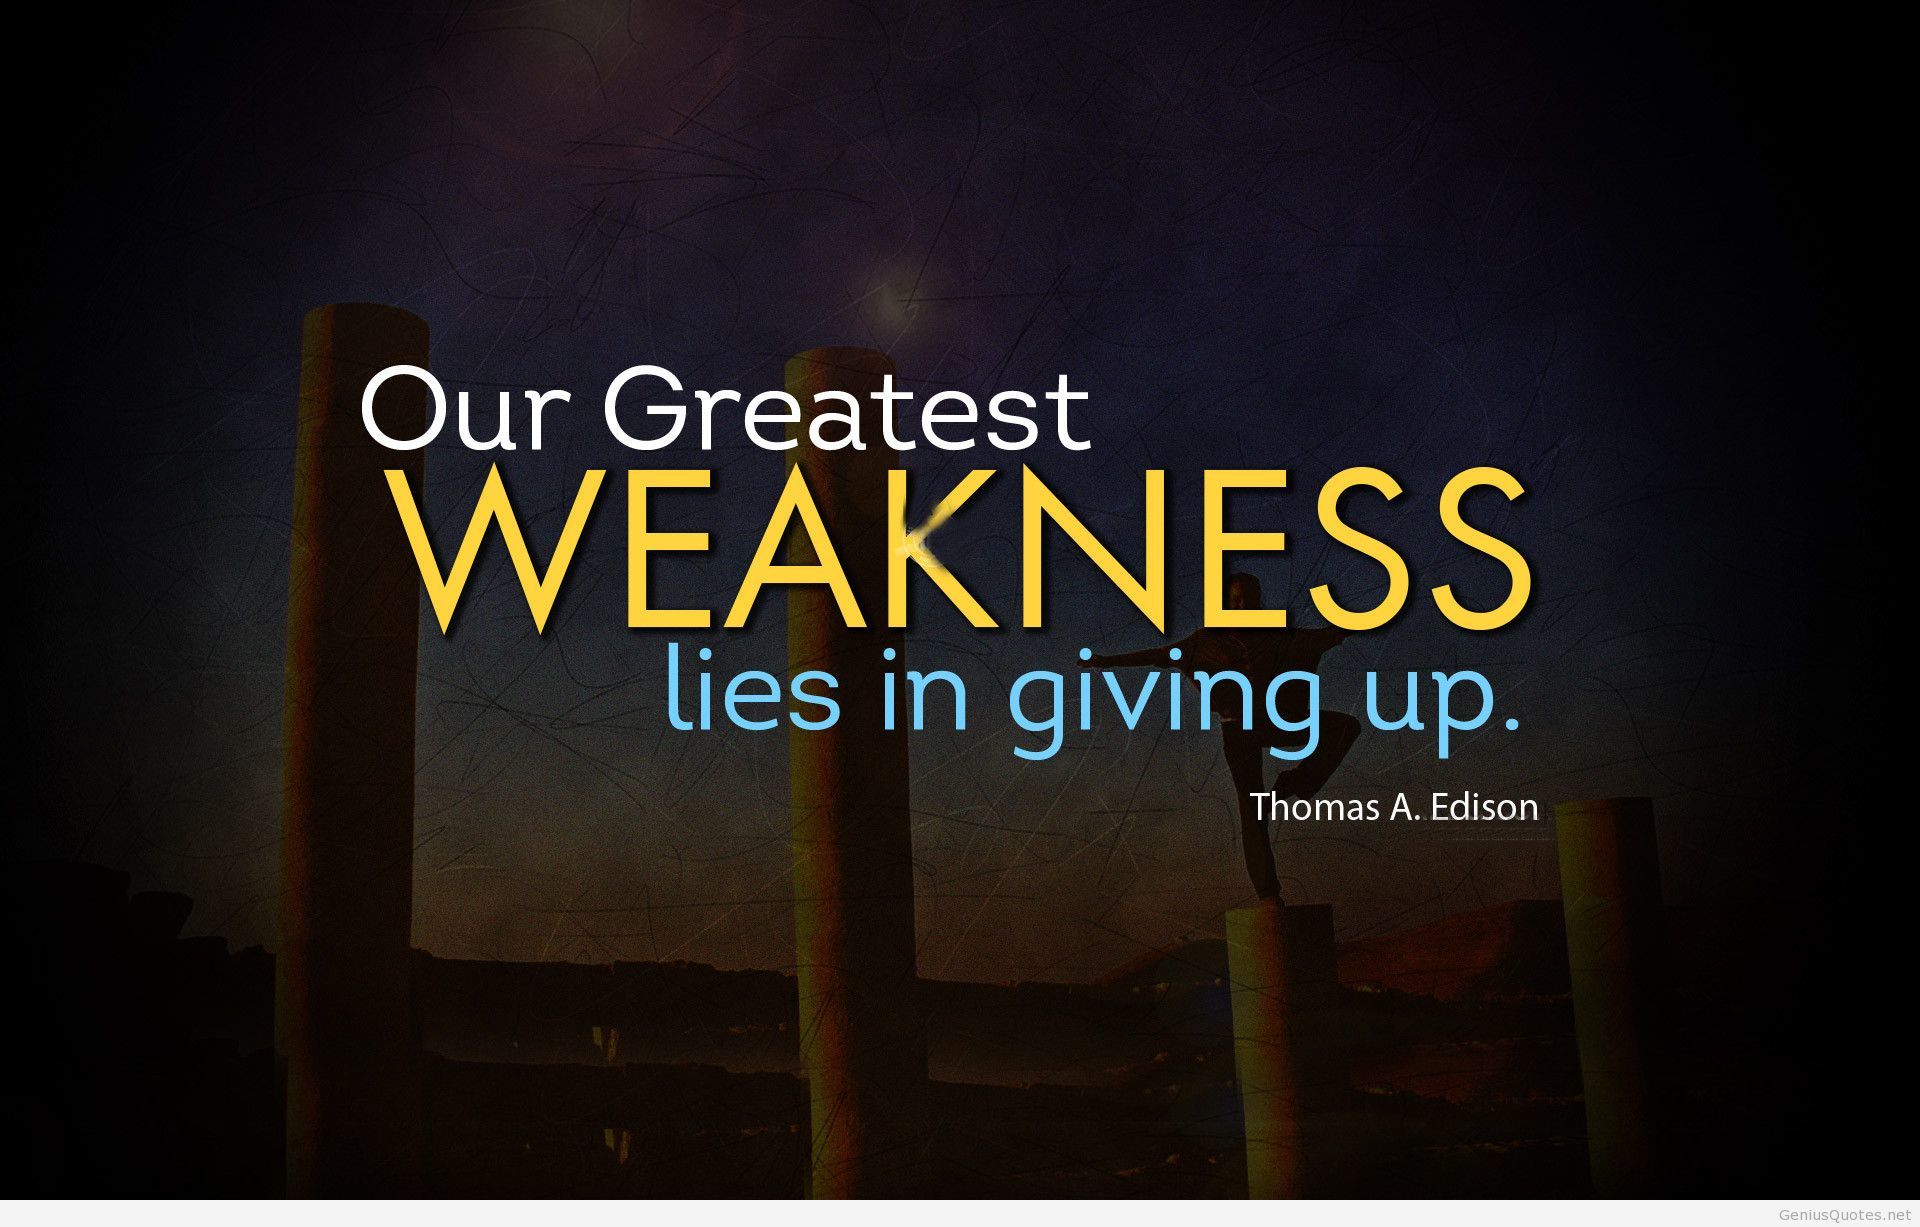 Our greatest weakness lies in giving up. Thomas A. Edison